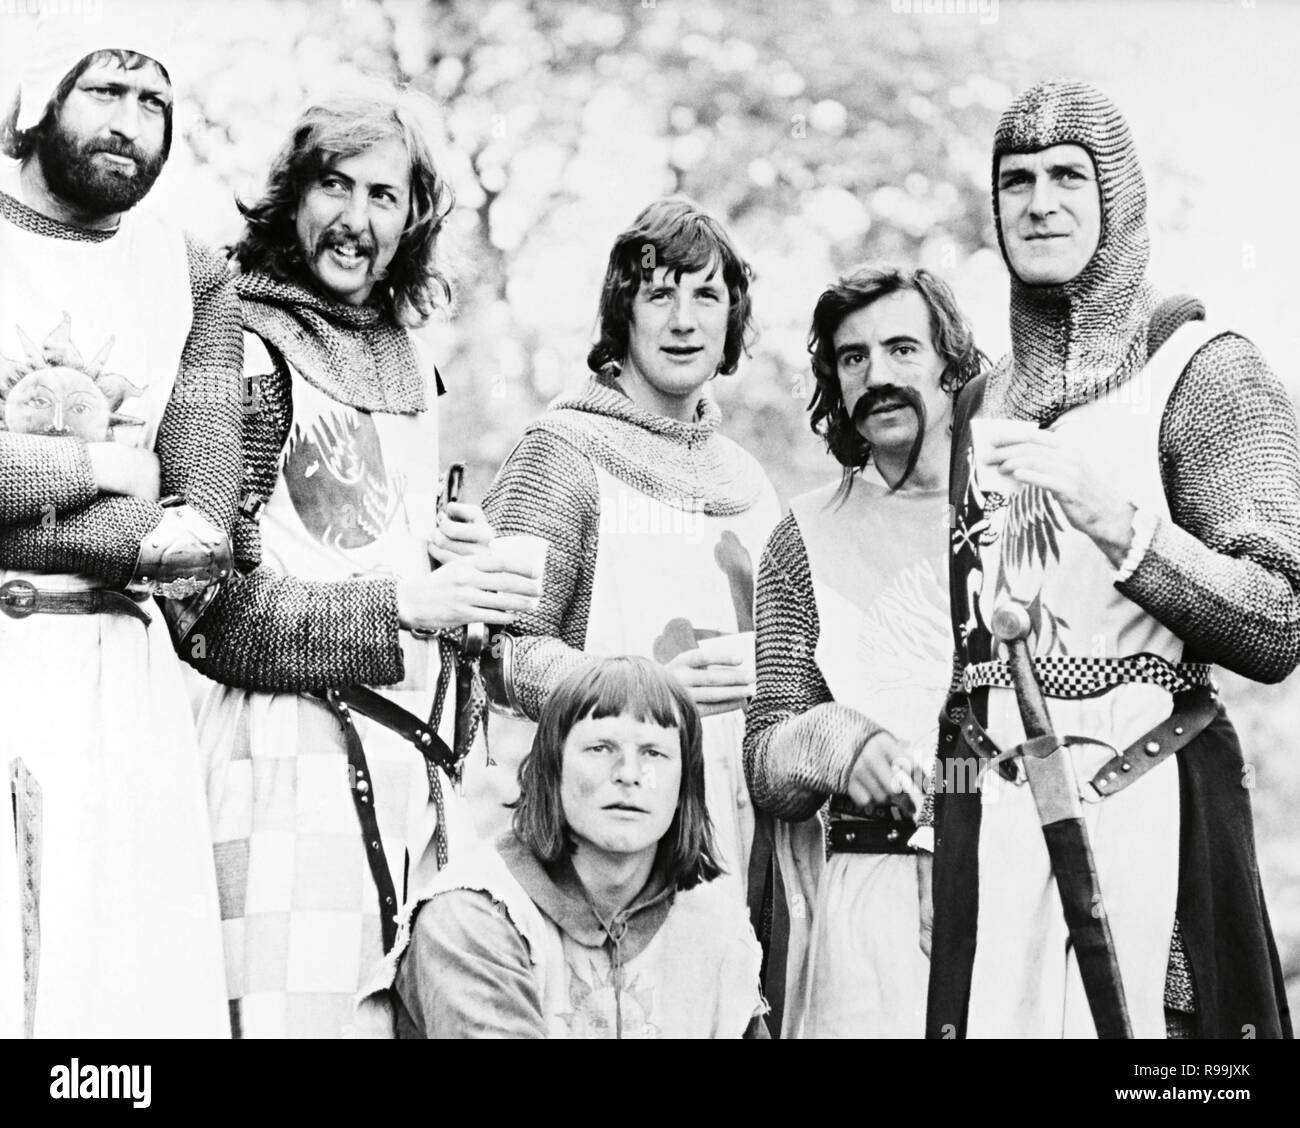 Original film title: MONTY PYTHON AND THE HOLY GRAIL. English title: MONTY PYTHON AND THE HOLY GRAIL. Year: 1975. Director: TERRY GILLIAM; TERRY JONES. Stars: LANCELOT; MICHAEL PALIN; JOHN CLEESE; ERIC IDLE; TERRY GILLIAM; MONTY PYTHON; TERRY JONES. Credit: PYTHON PICTURES/EMI / Album Stock Photo